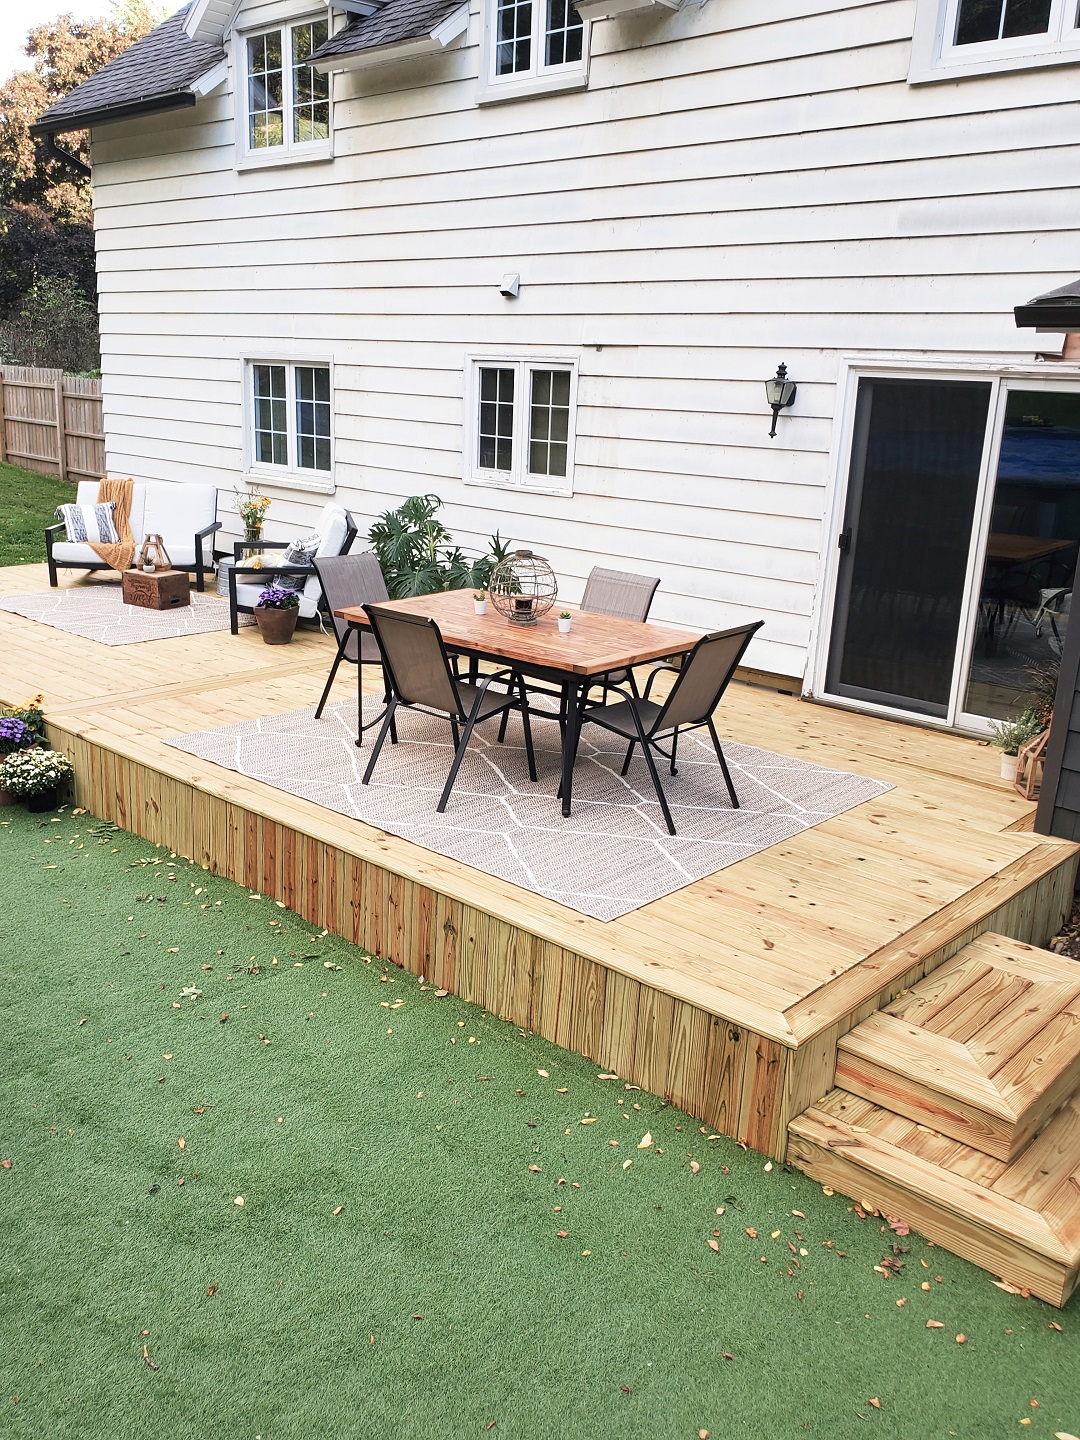 Completed Deck with furniture